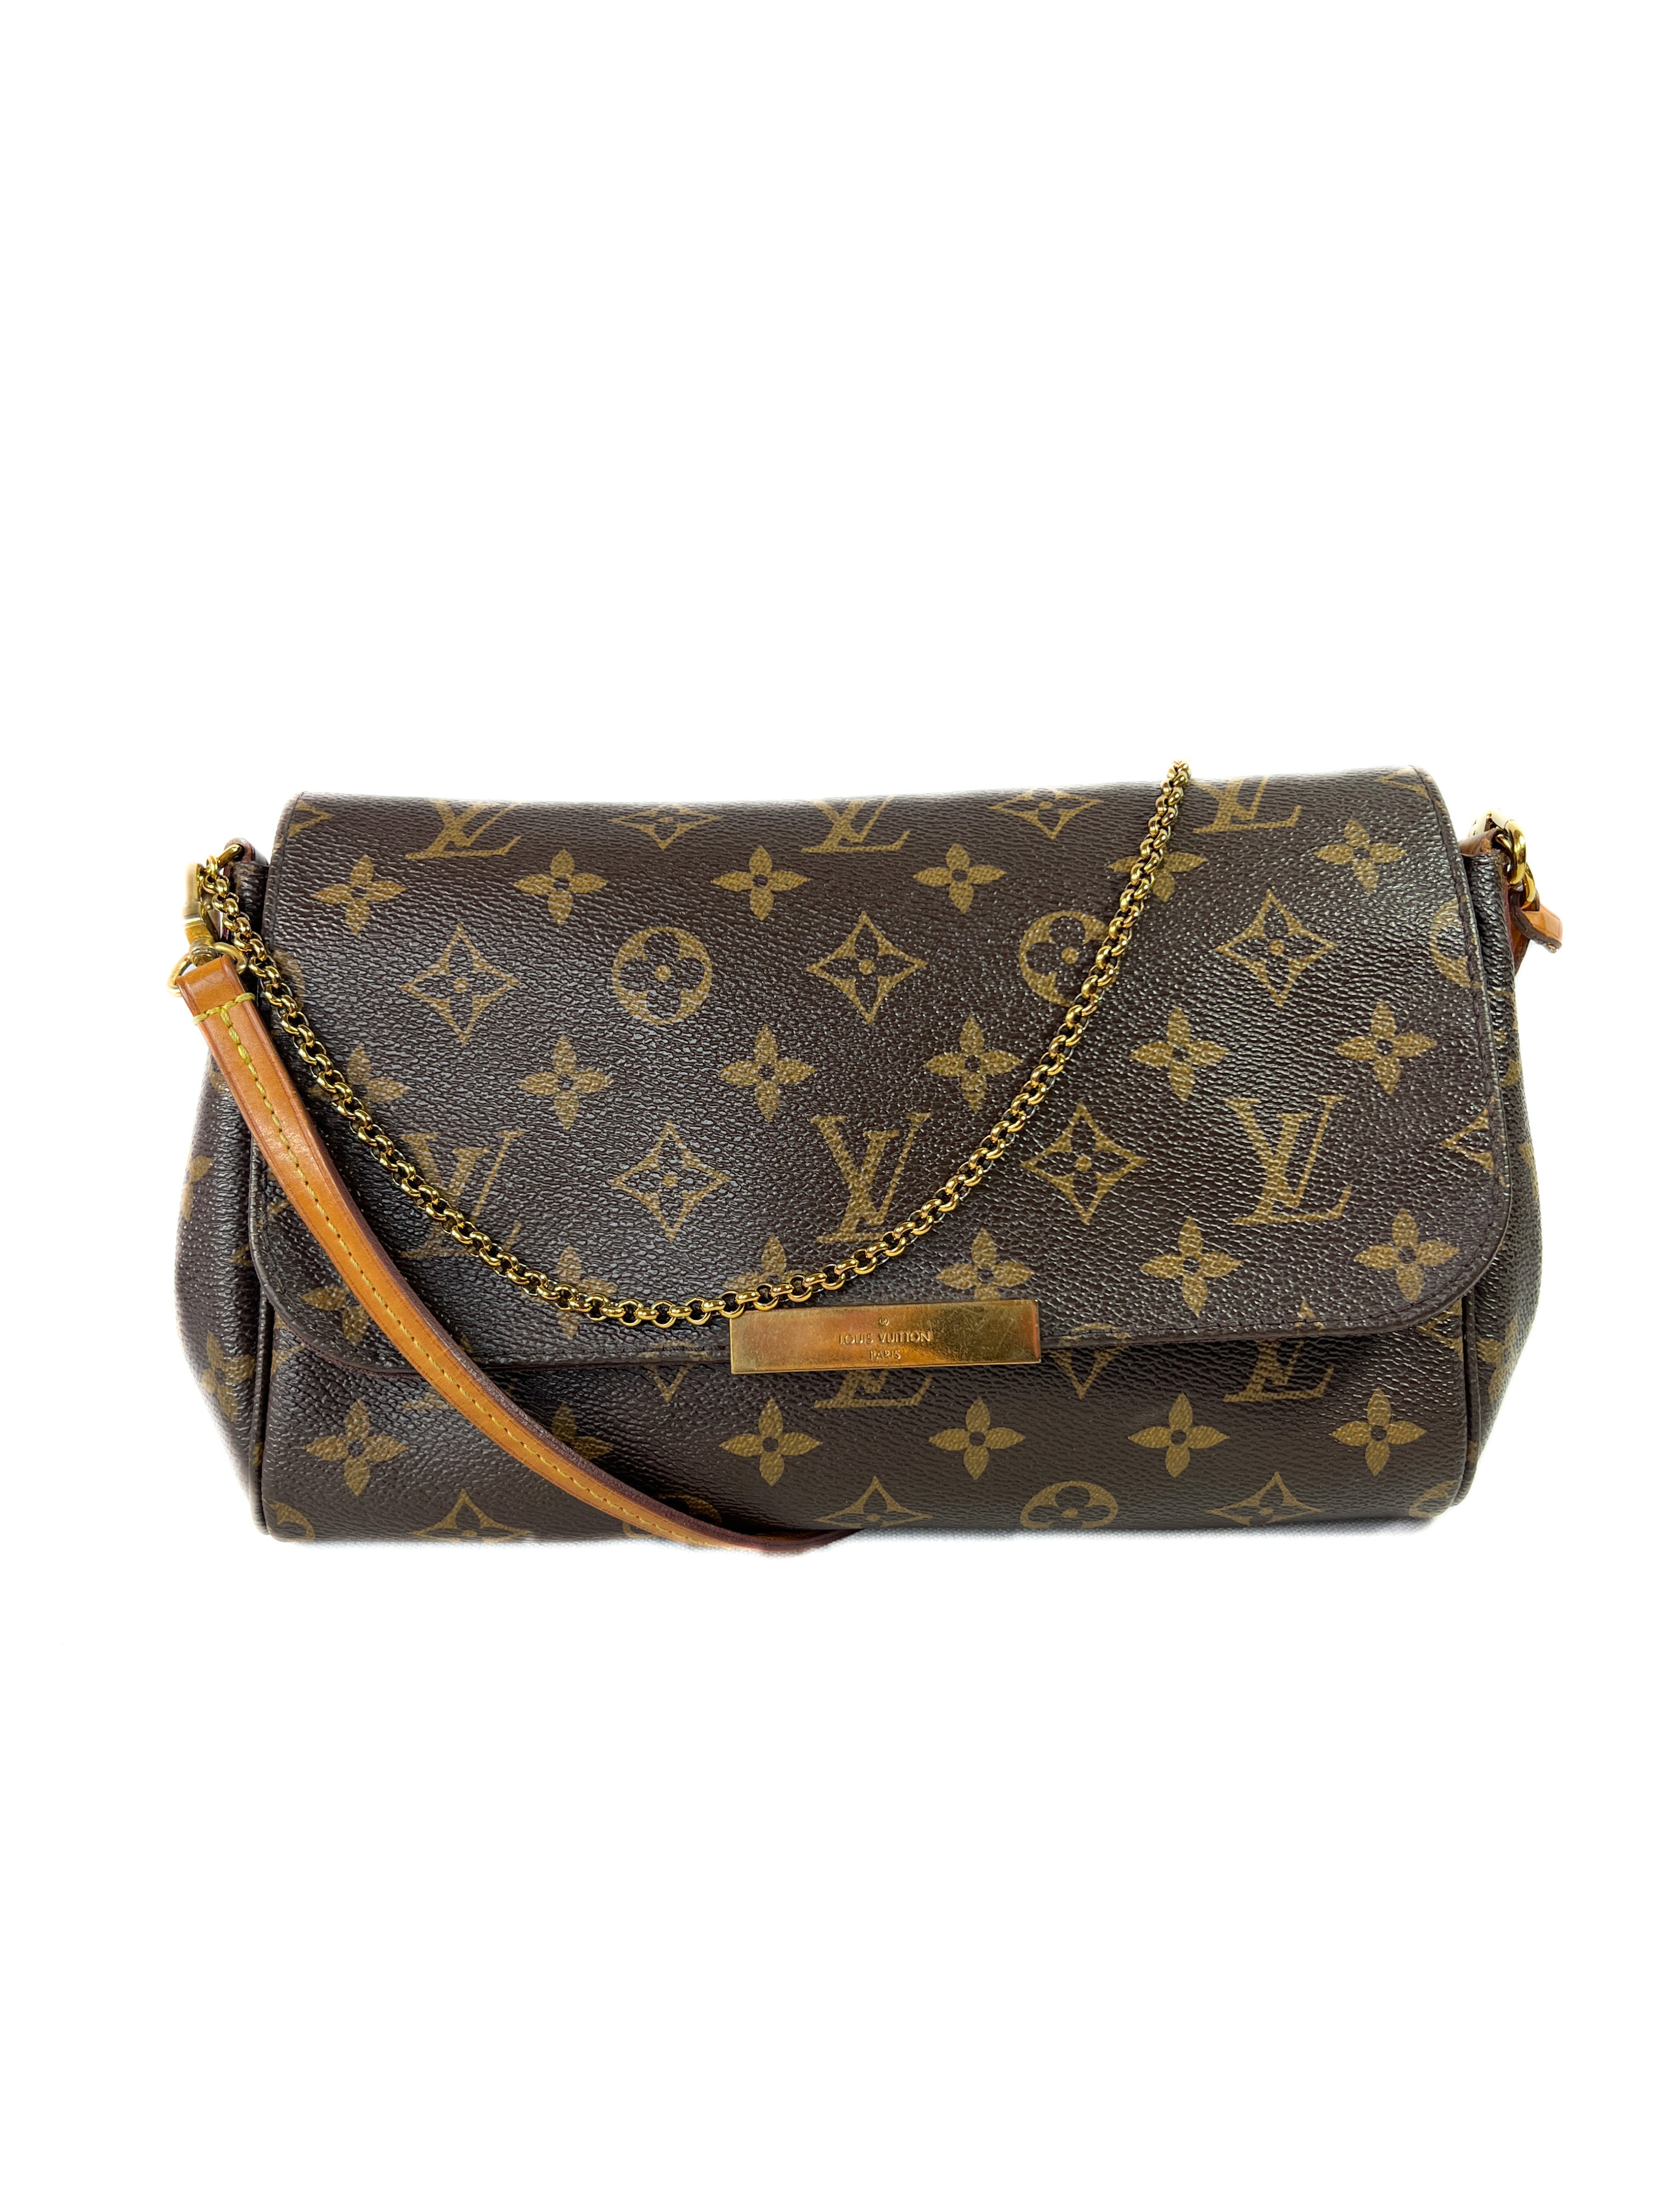 Louis Vuitton Favorite MM Monogram crossbody Bag With New Strap (Never Used)